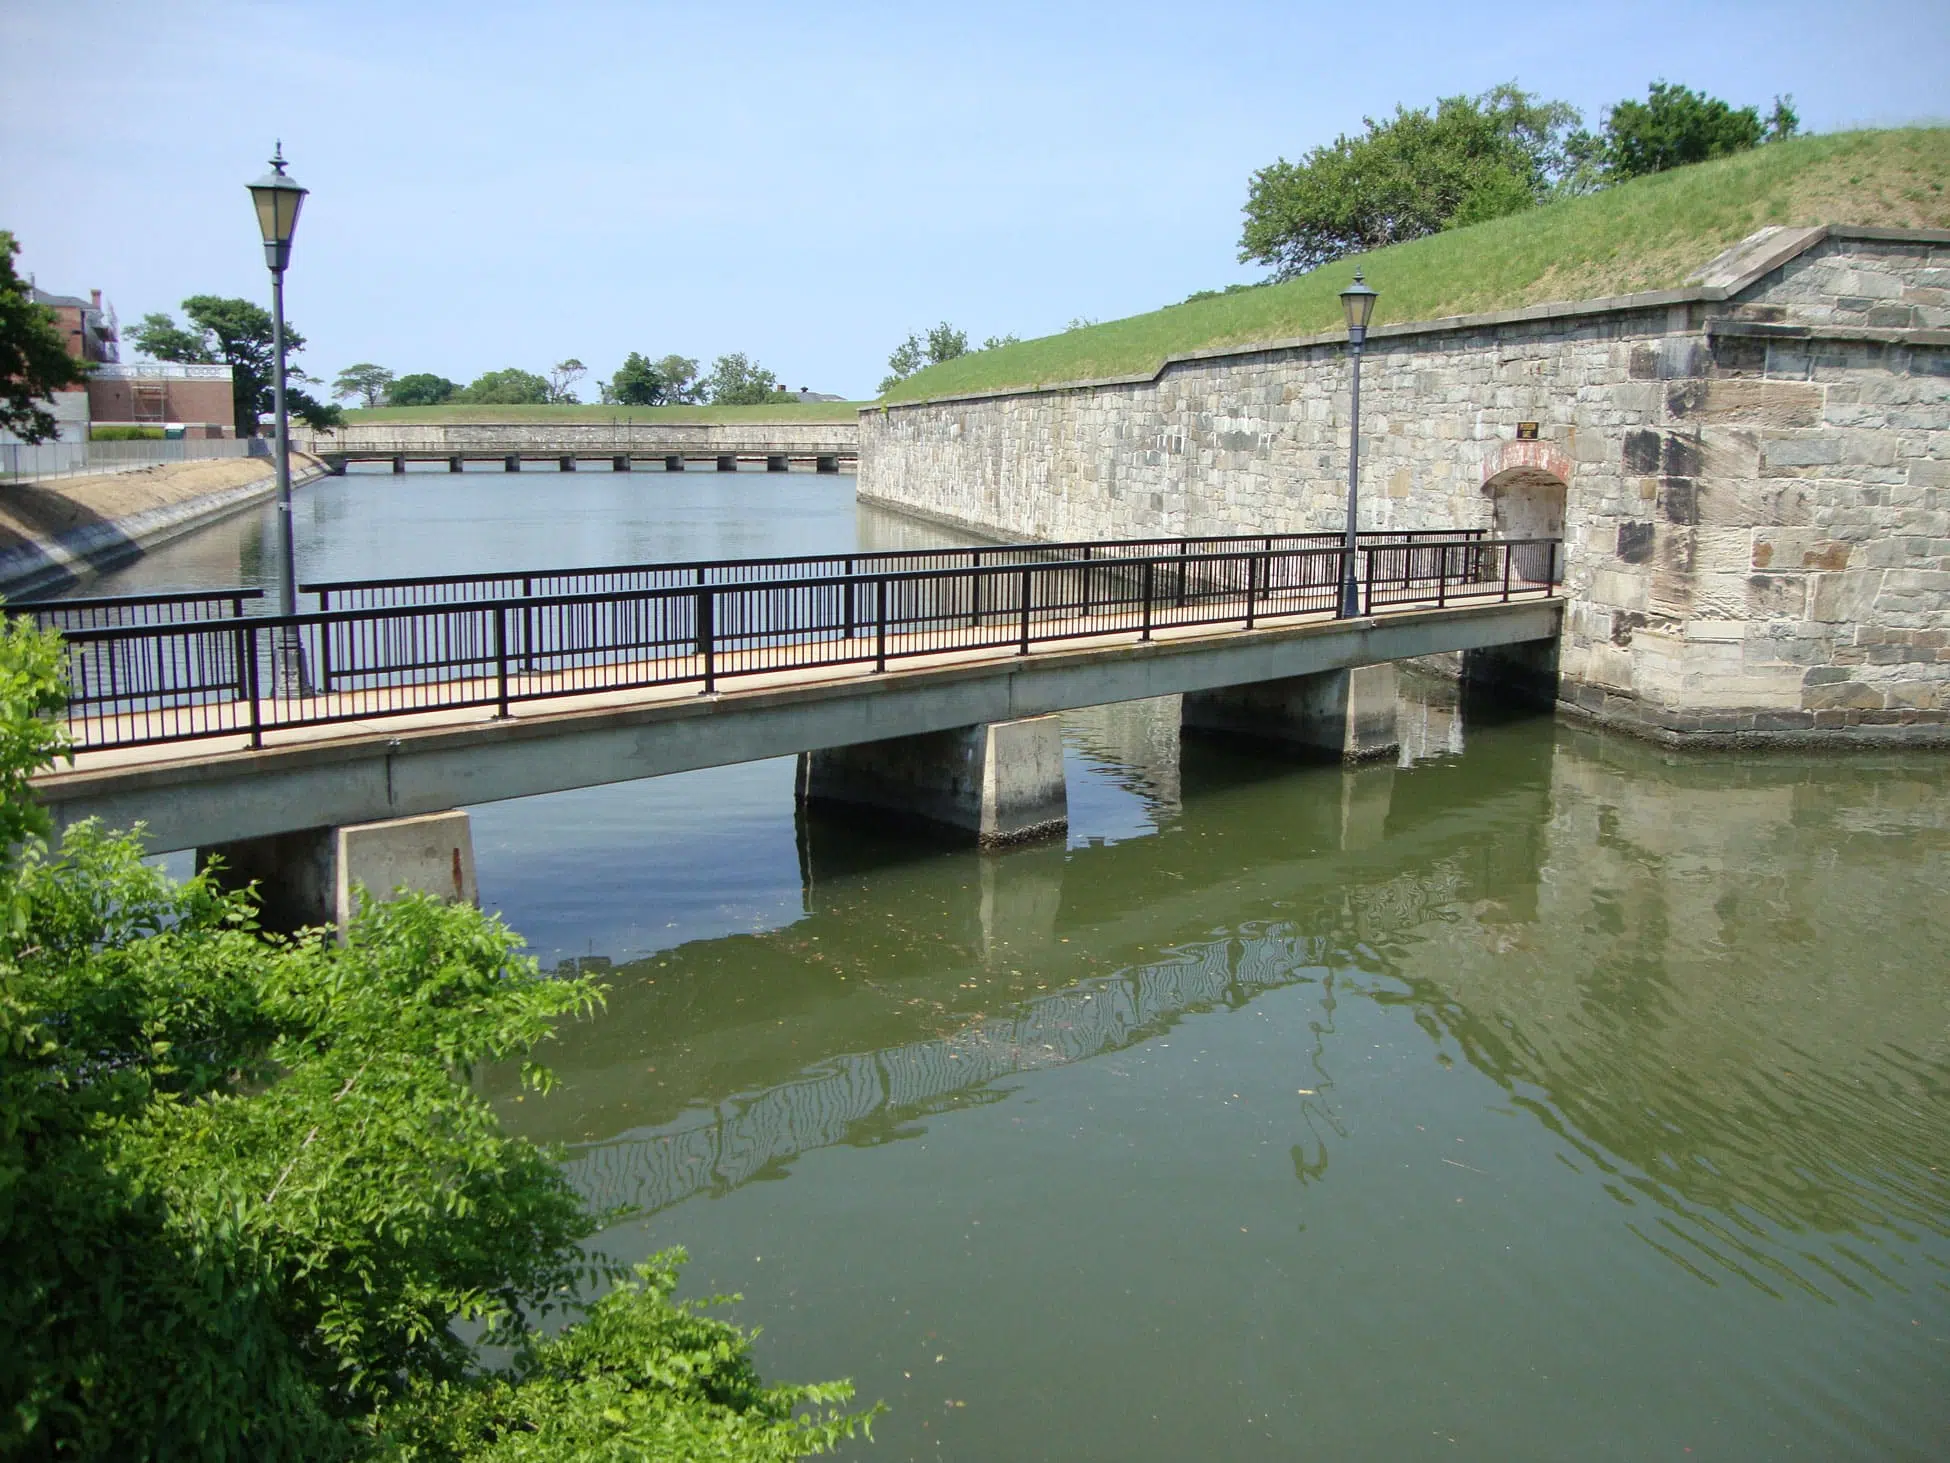 Kimley-Horn partnered with Fort Monroe to provide an array of services supporting the redevelopment of the decommissioned military installation.